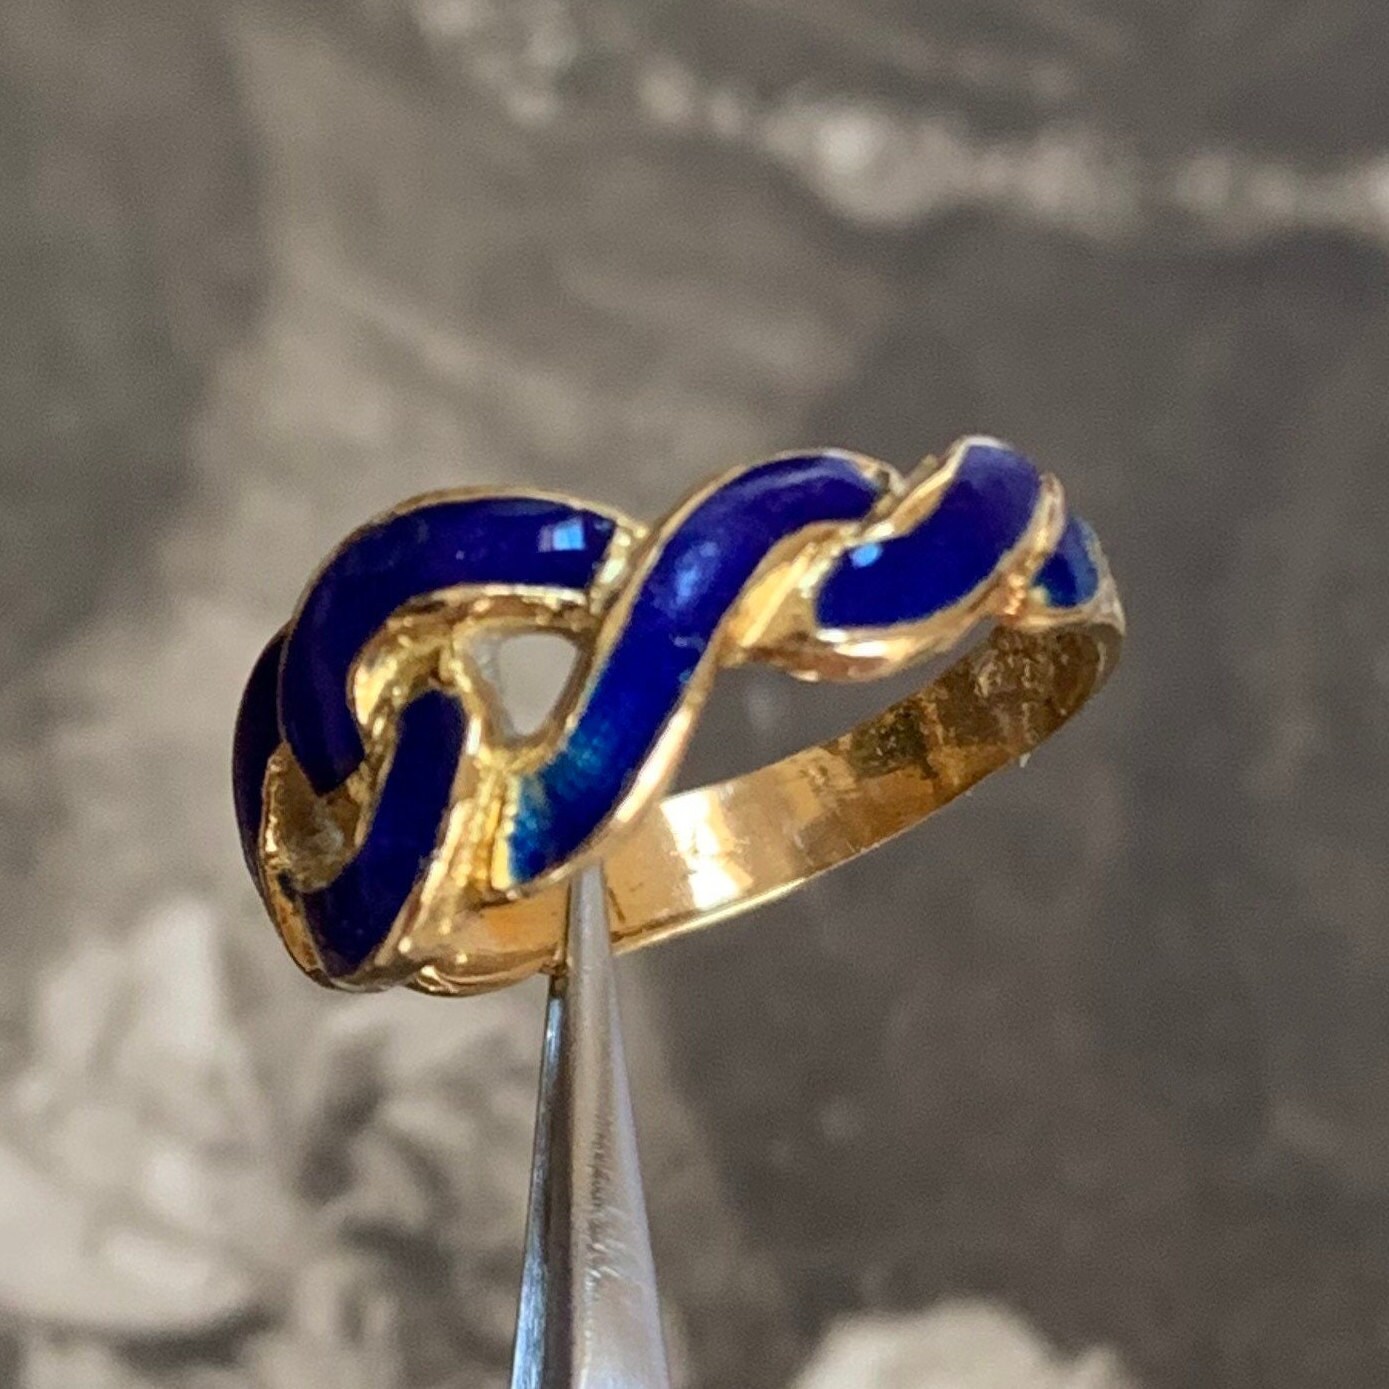 Vintage 18Ct Gold Ring With Blue Enamelling Designed & Made By Bonauguri Lucio in 1962 Italian Hallmarks